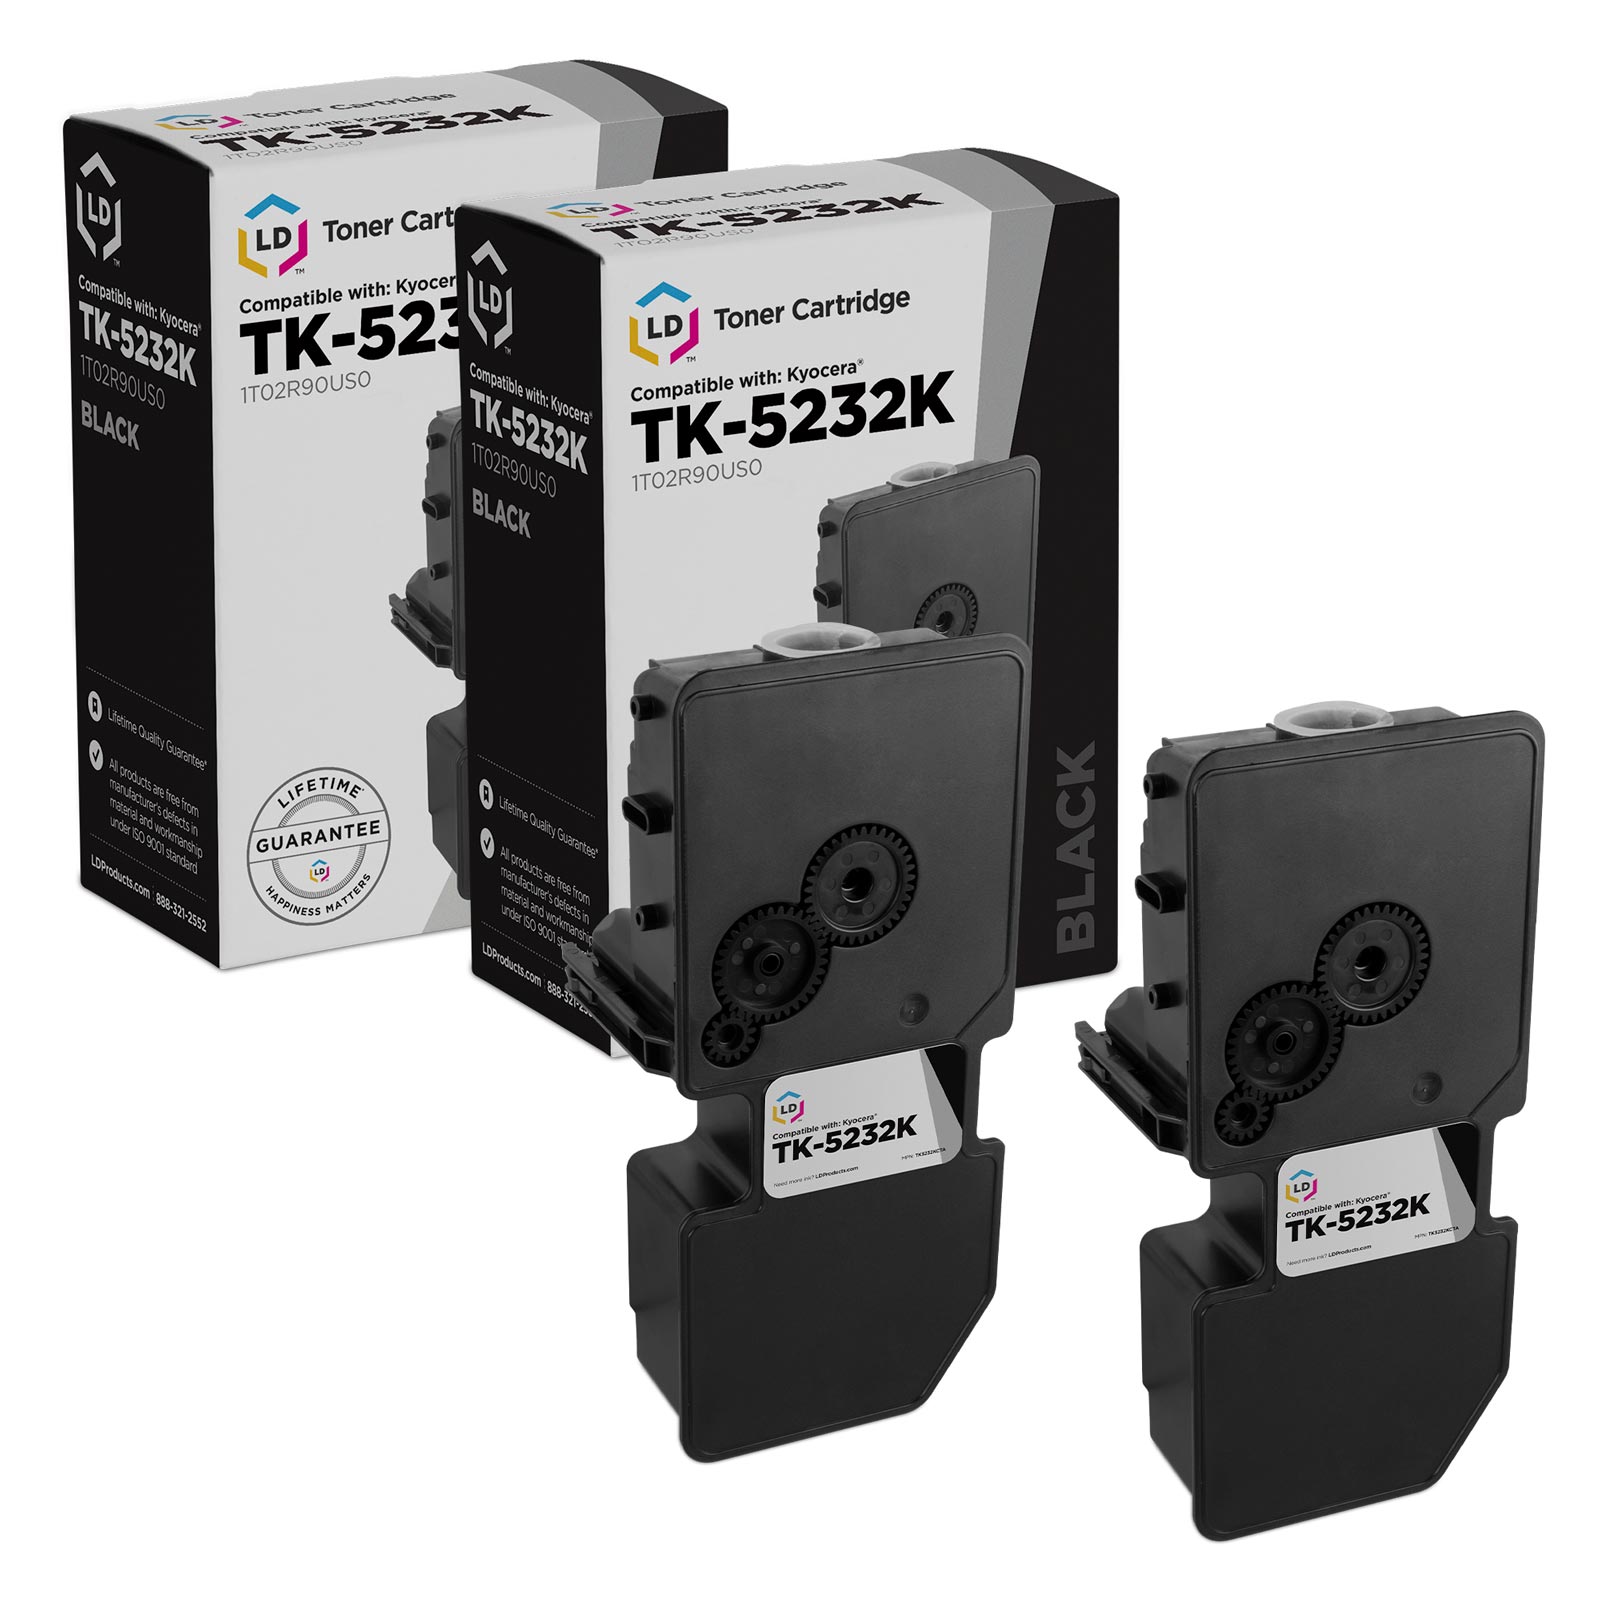 LD Compatible Toner Cartridge Replacement for Kyocera TK-5232K 1T02R90US0 (Black, 2-Pack) - image 1 of 7